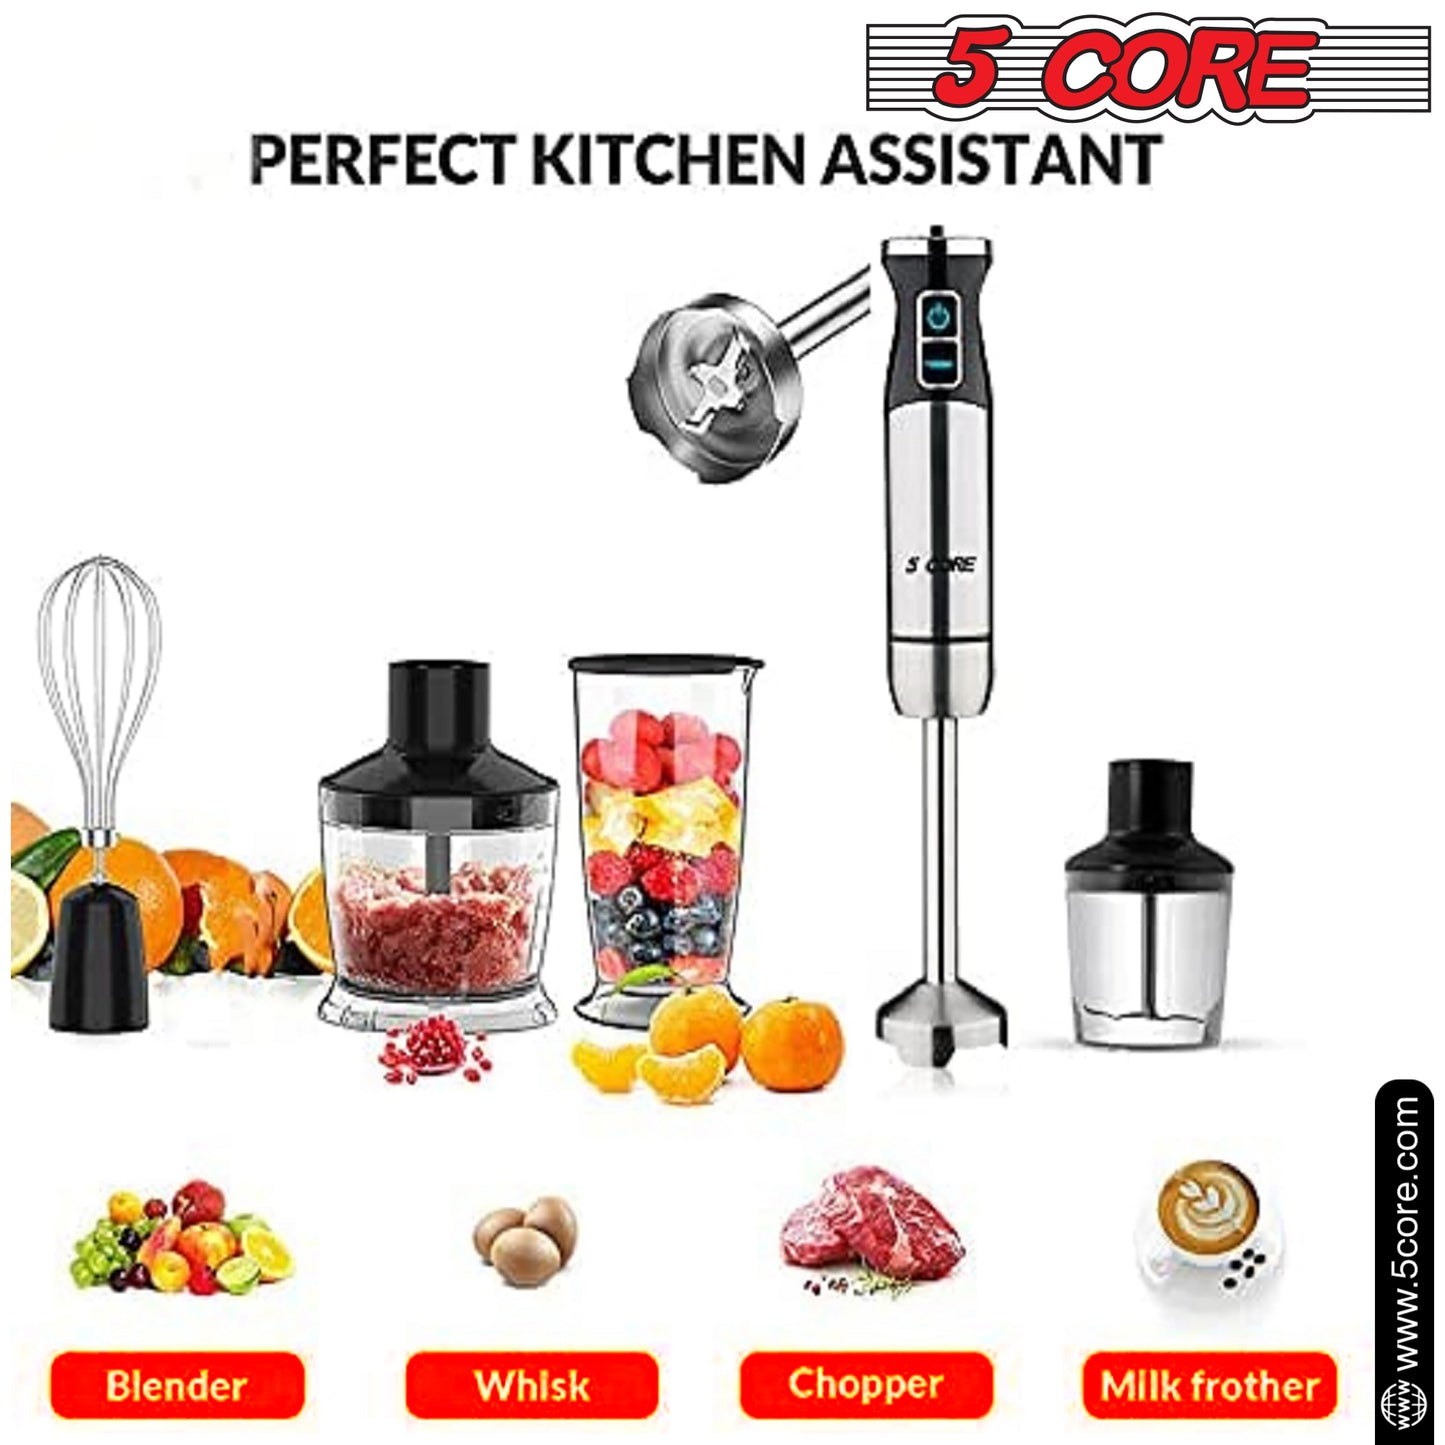 Powerful Immersion Blender Red| 500 Watt Multi-Purpose Hand Blender Heavy Duty Copper Motor 304 Stainless Steel Blades| for Soup, Smoothie, Puree, Baby Food, 304 Stainless Steel Blades- HB 1520